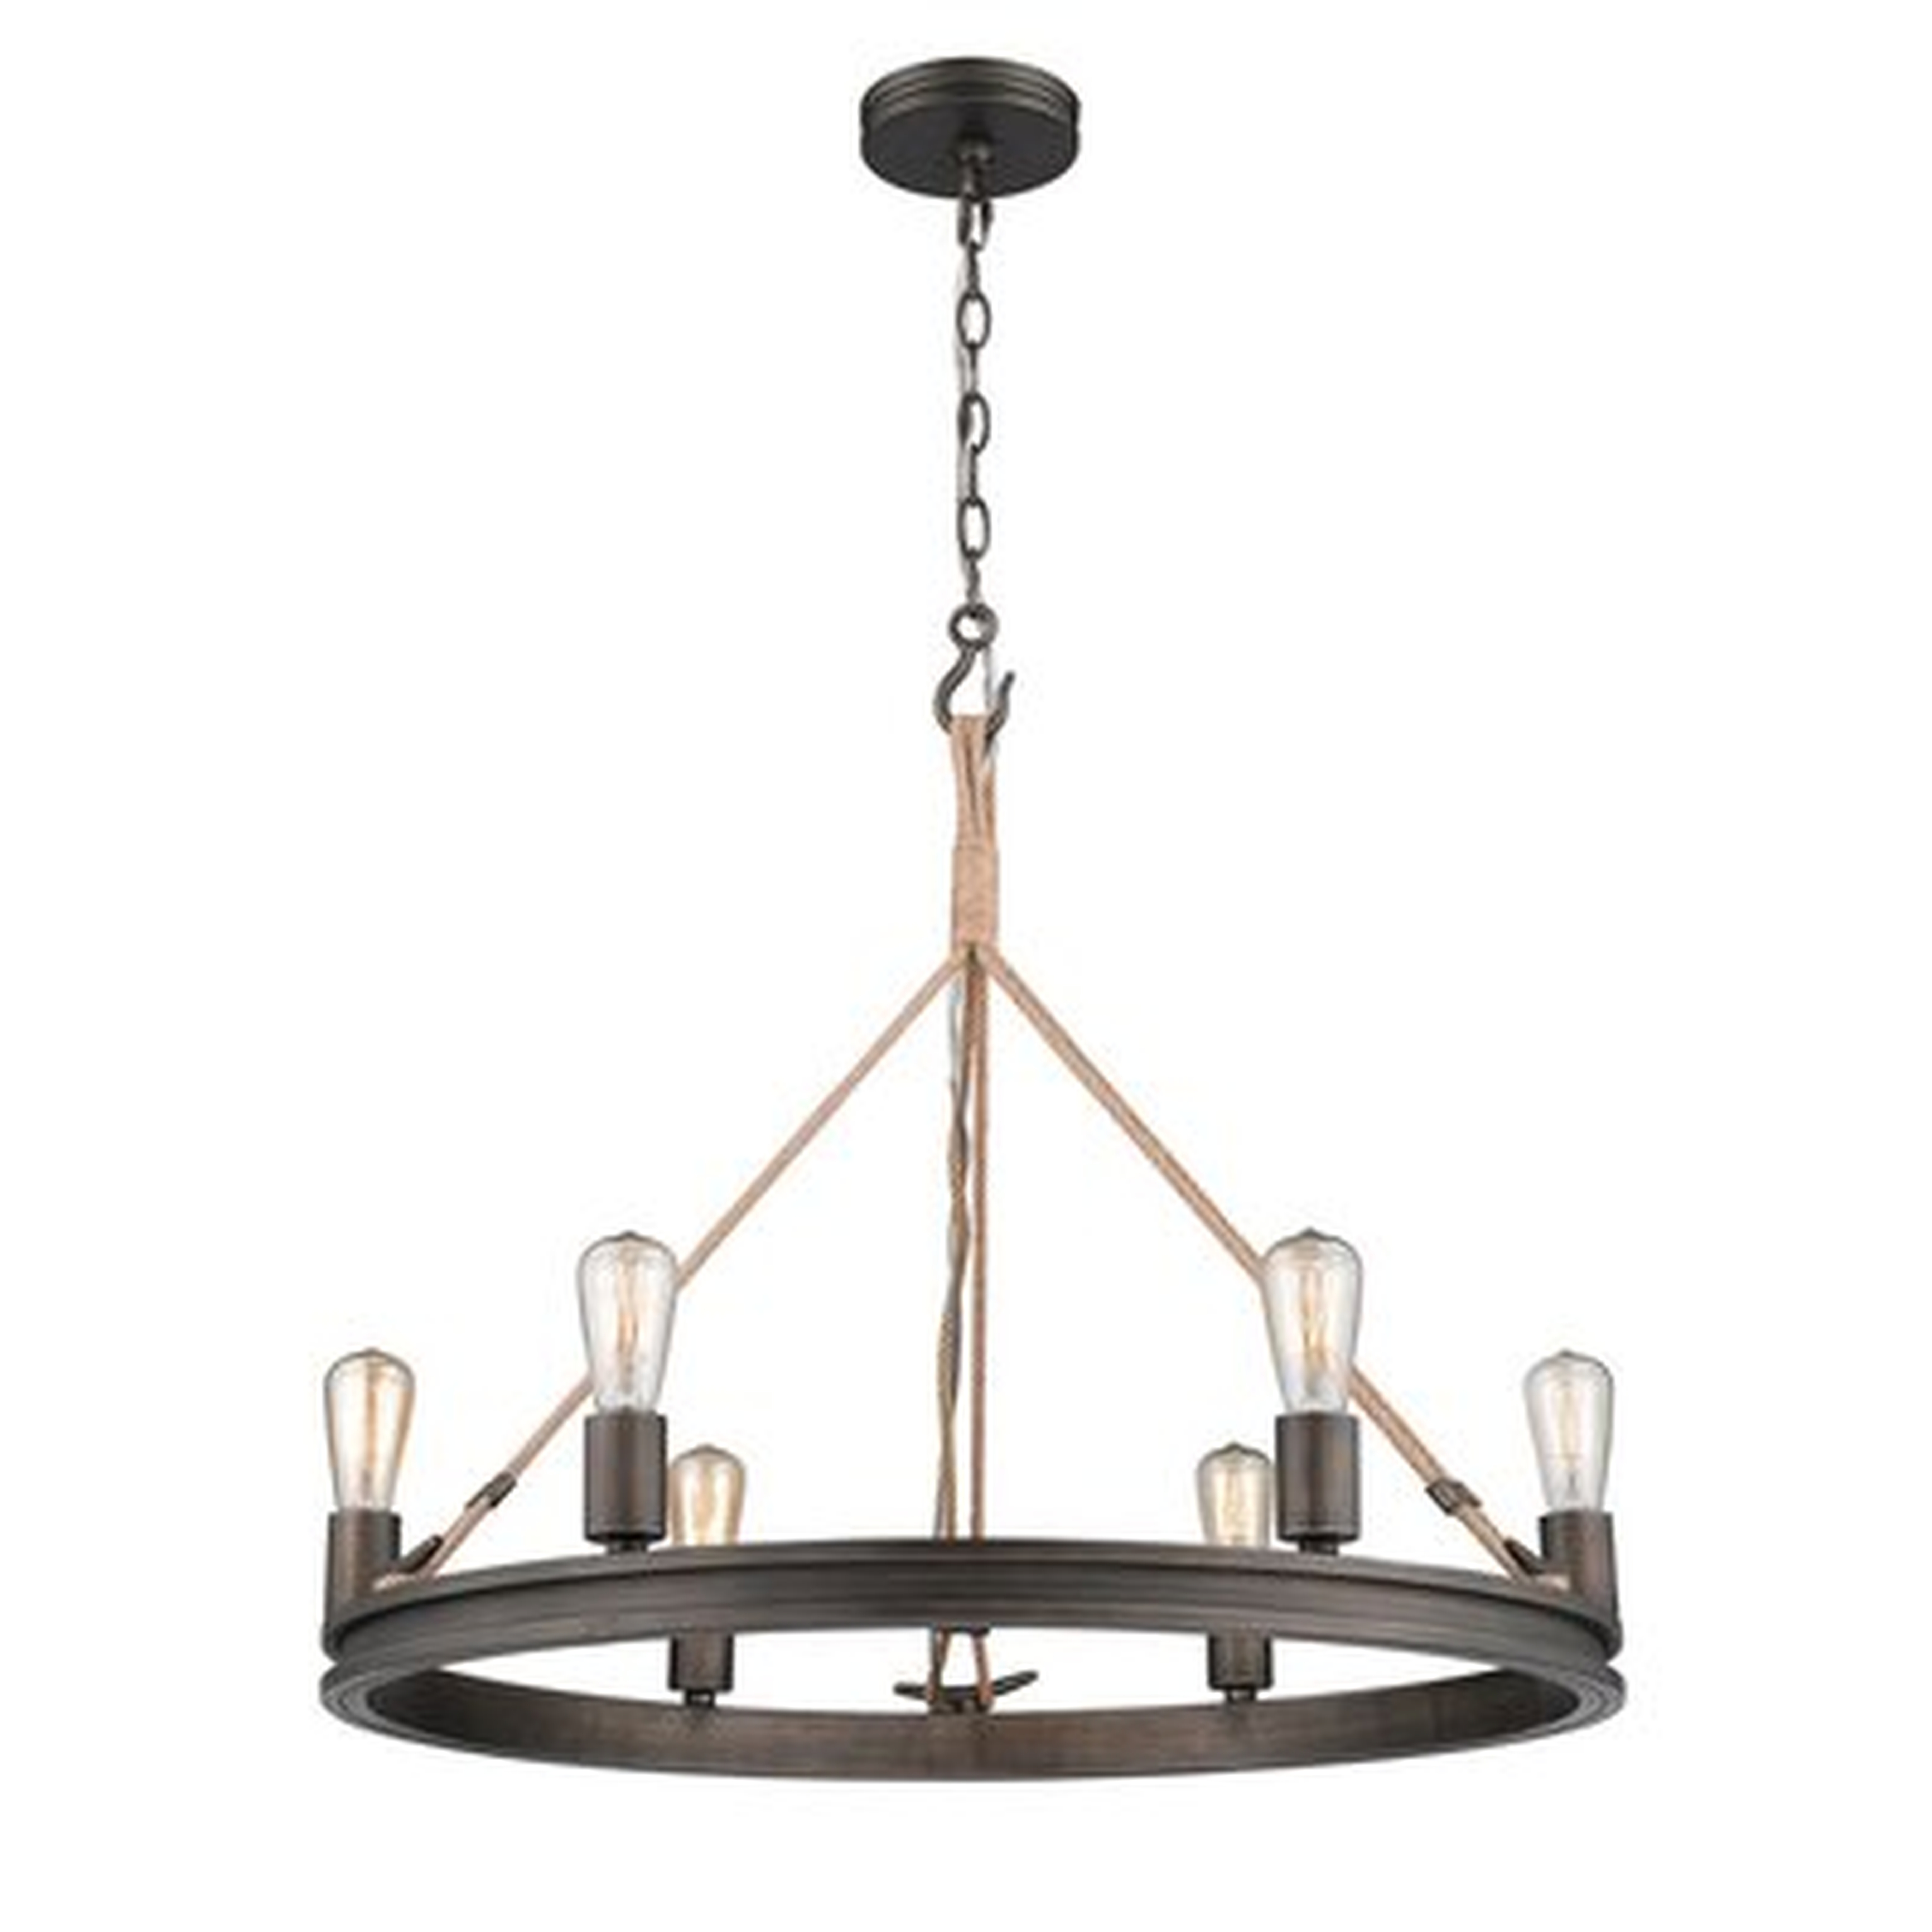 Vandervoort 6 - Light Candle Style Wagon Wheel Chandelier with Rope Accents - Birch Lane